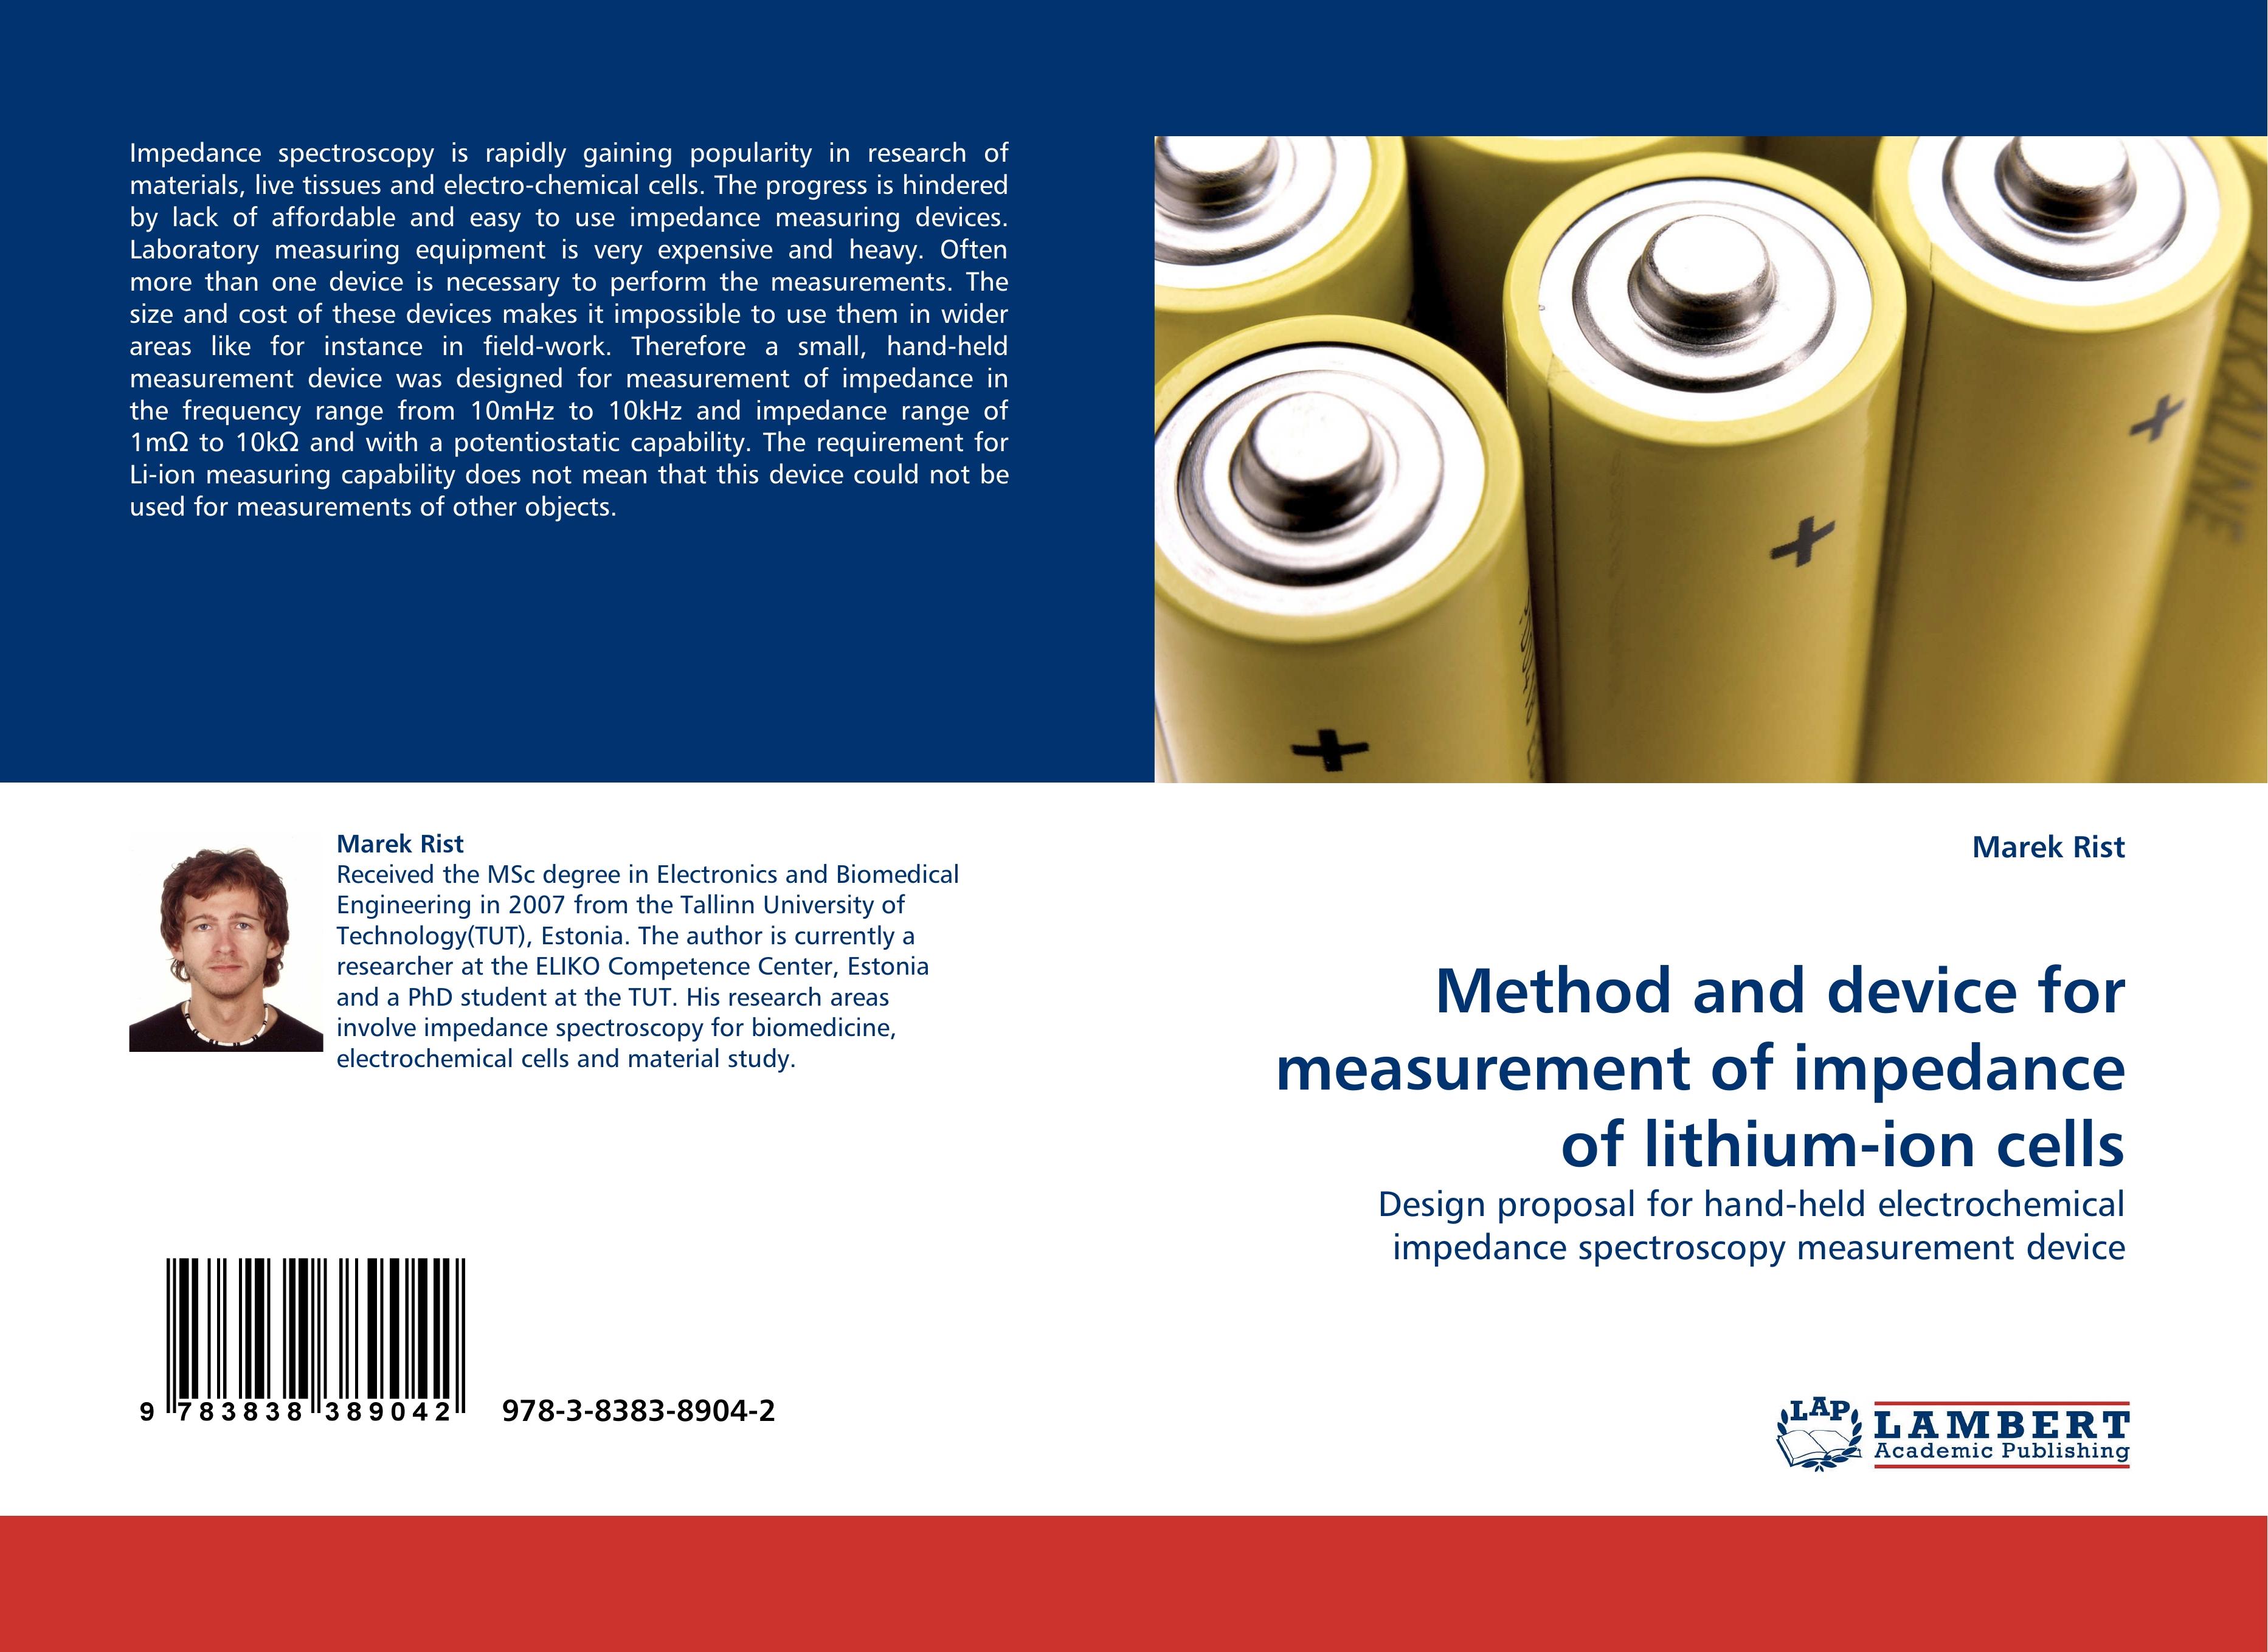 Method and device for measurement of impedance of lithium-ion cells | Design proposal for hand-held electrochemical impedance spectroscopy measurement device | Marek Rist | Taschenbuch | Paperback - Rist, Marek